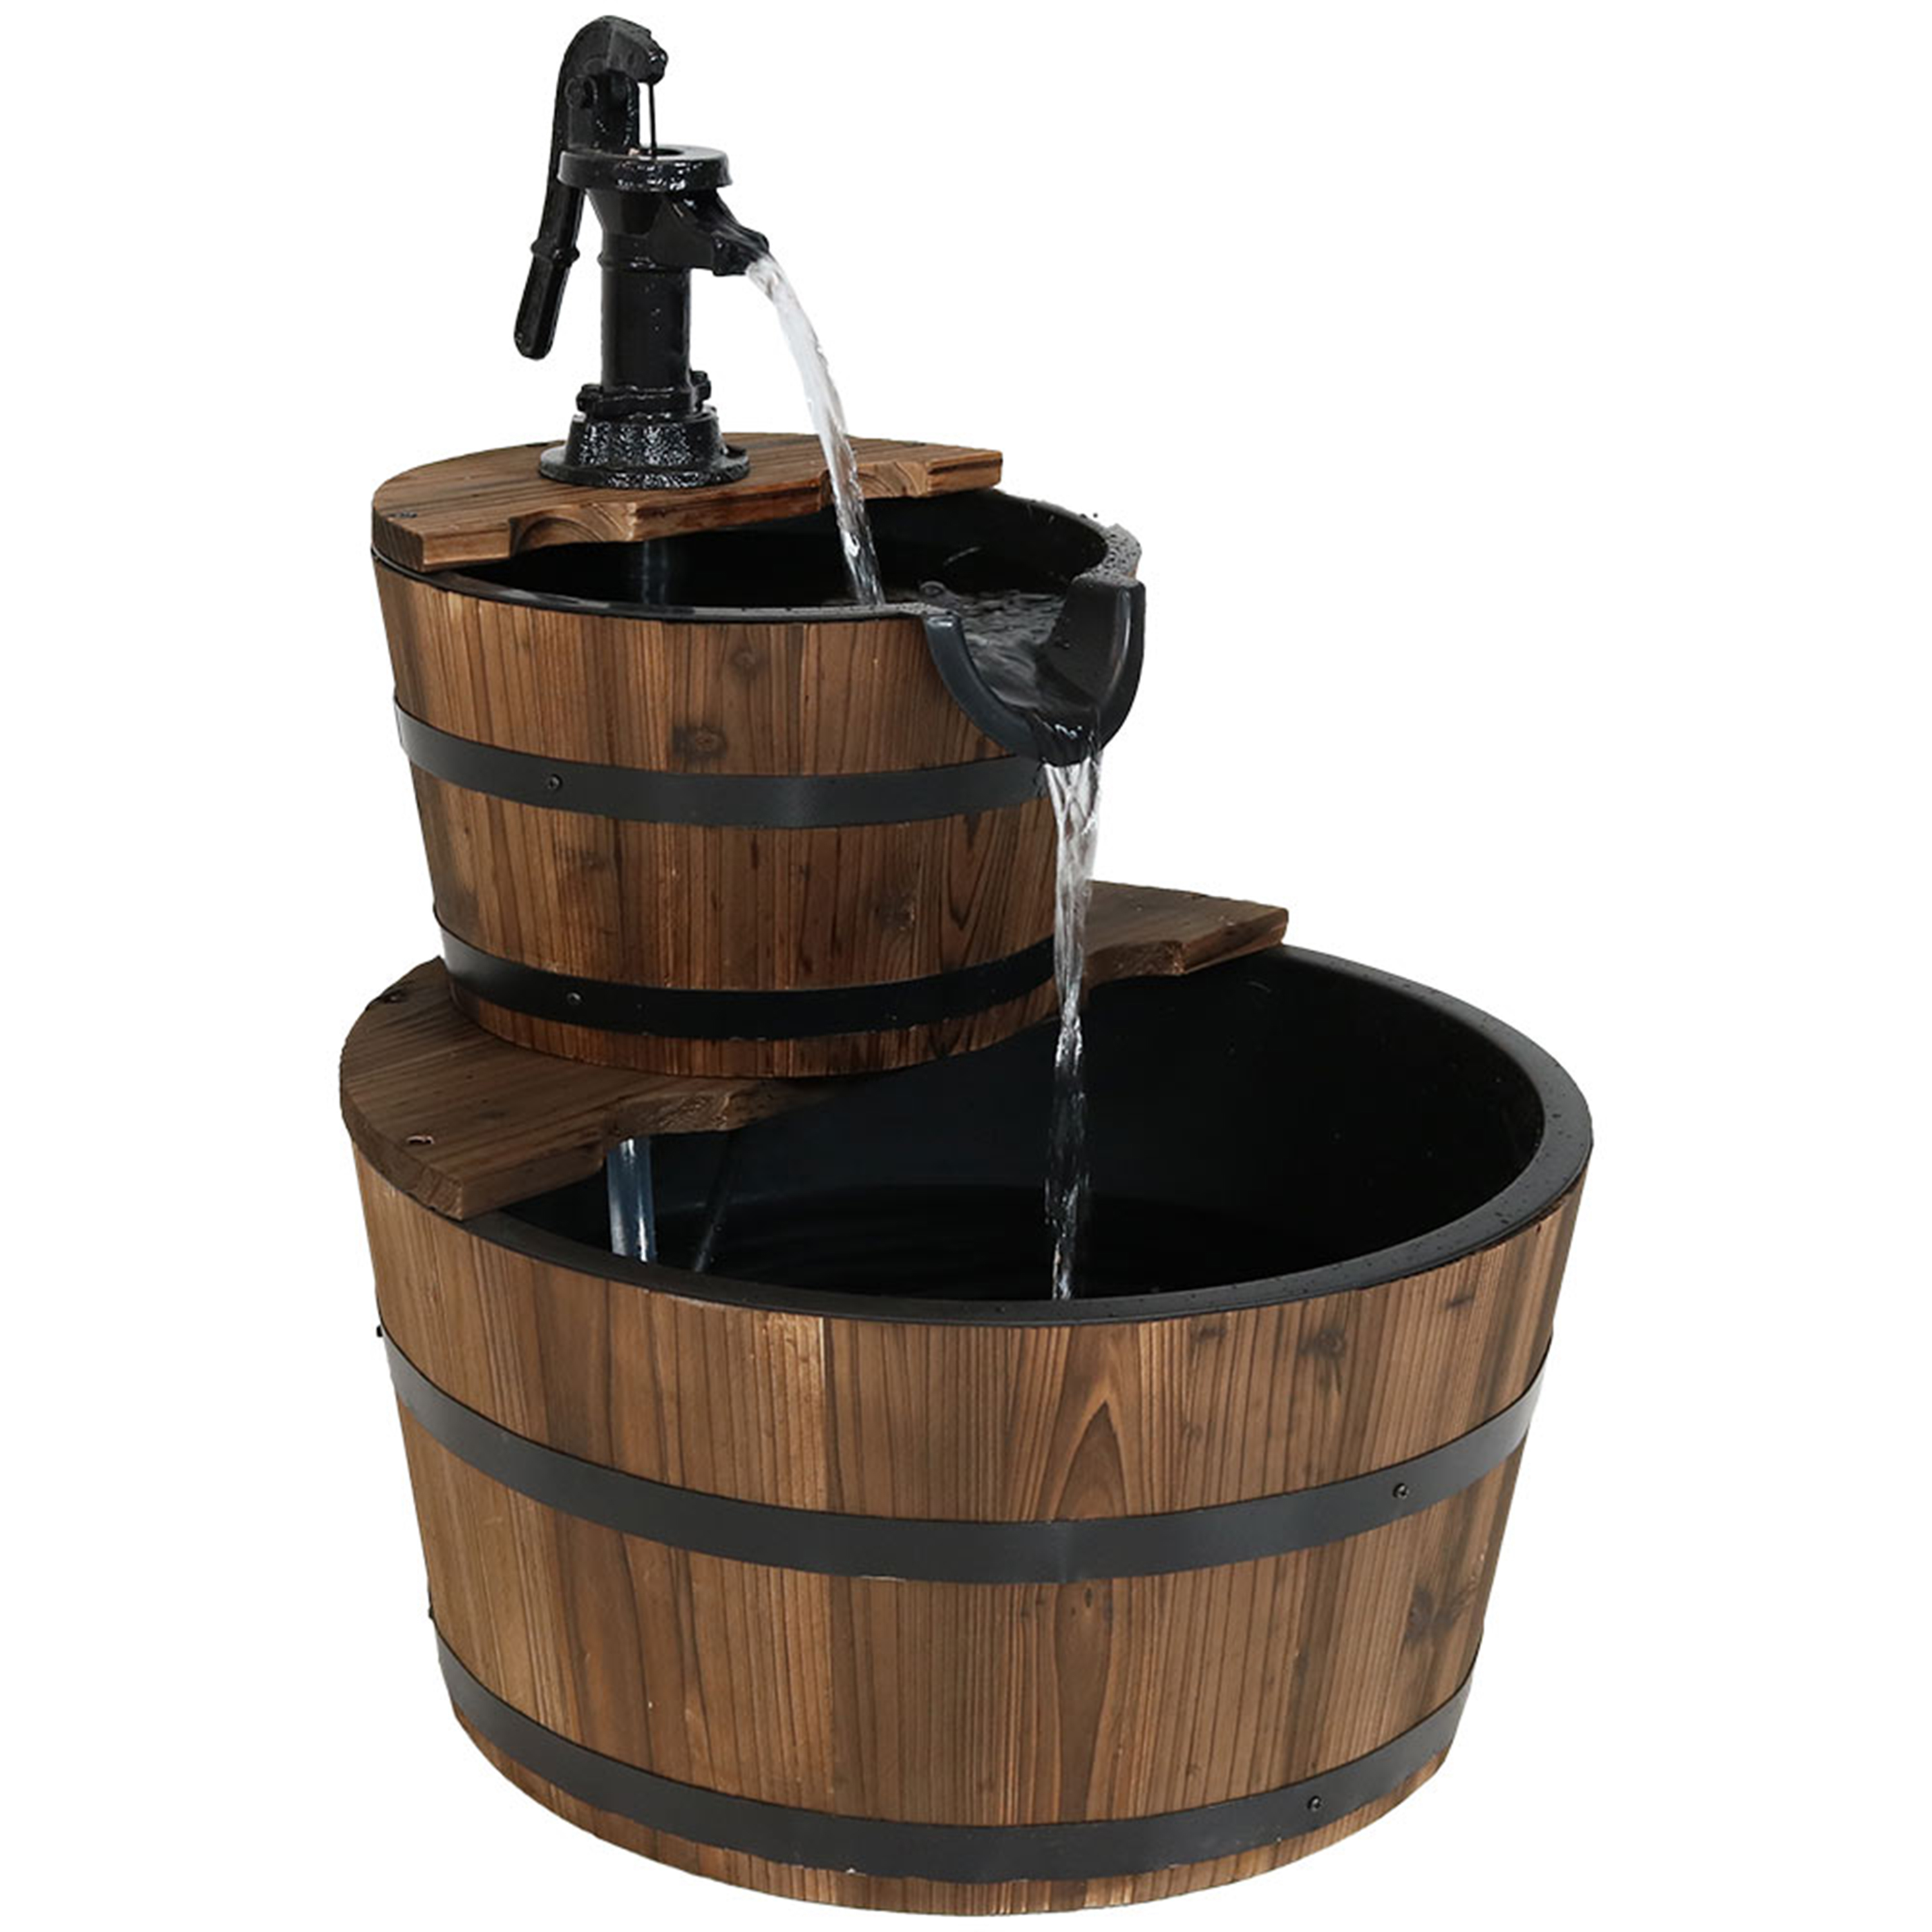 Sunnydaze Wooden Bowl and Barrel Water Fountain with Hand Pump and Liner - 23-Inch